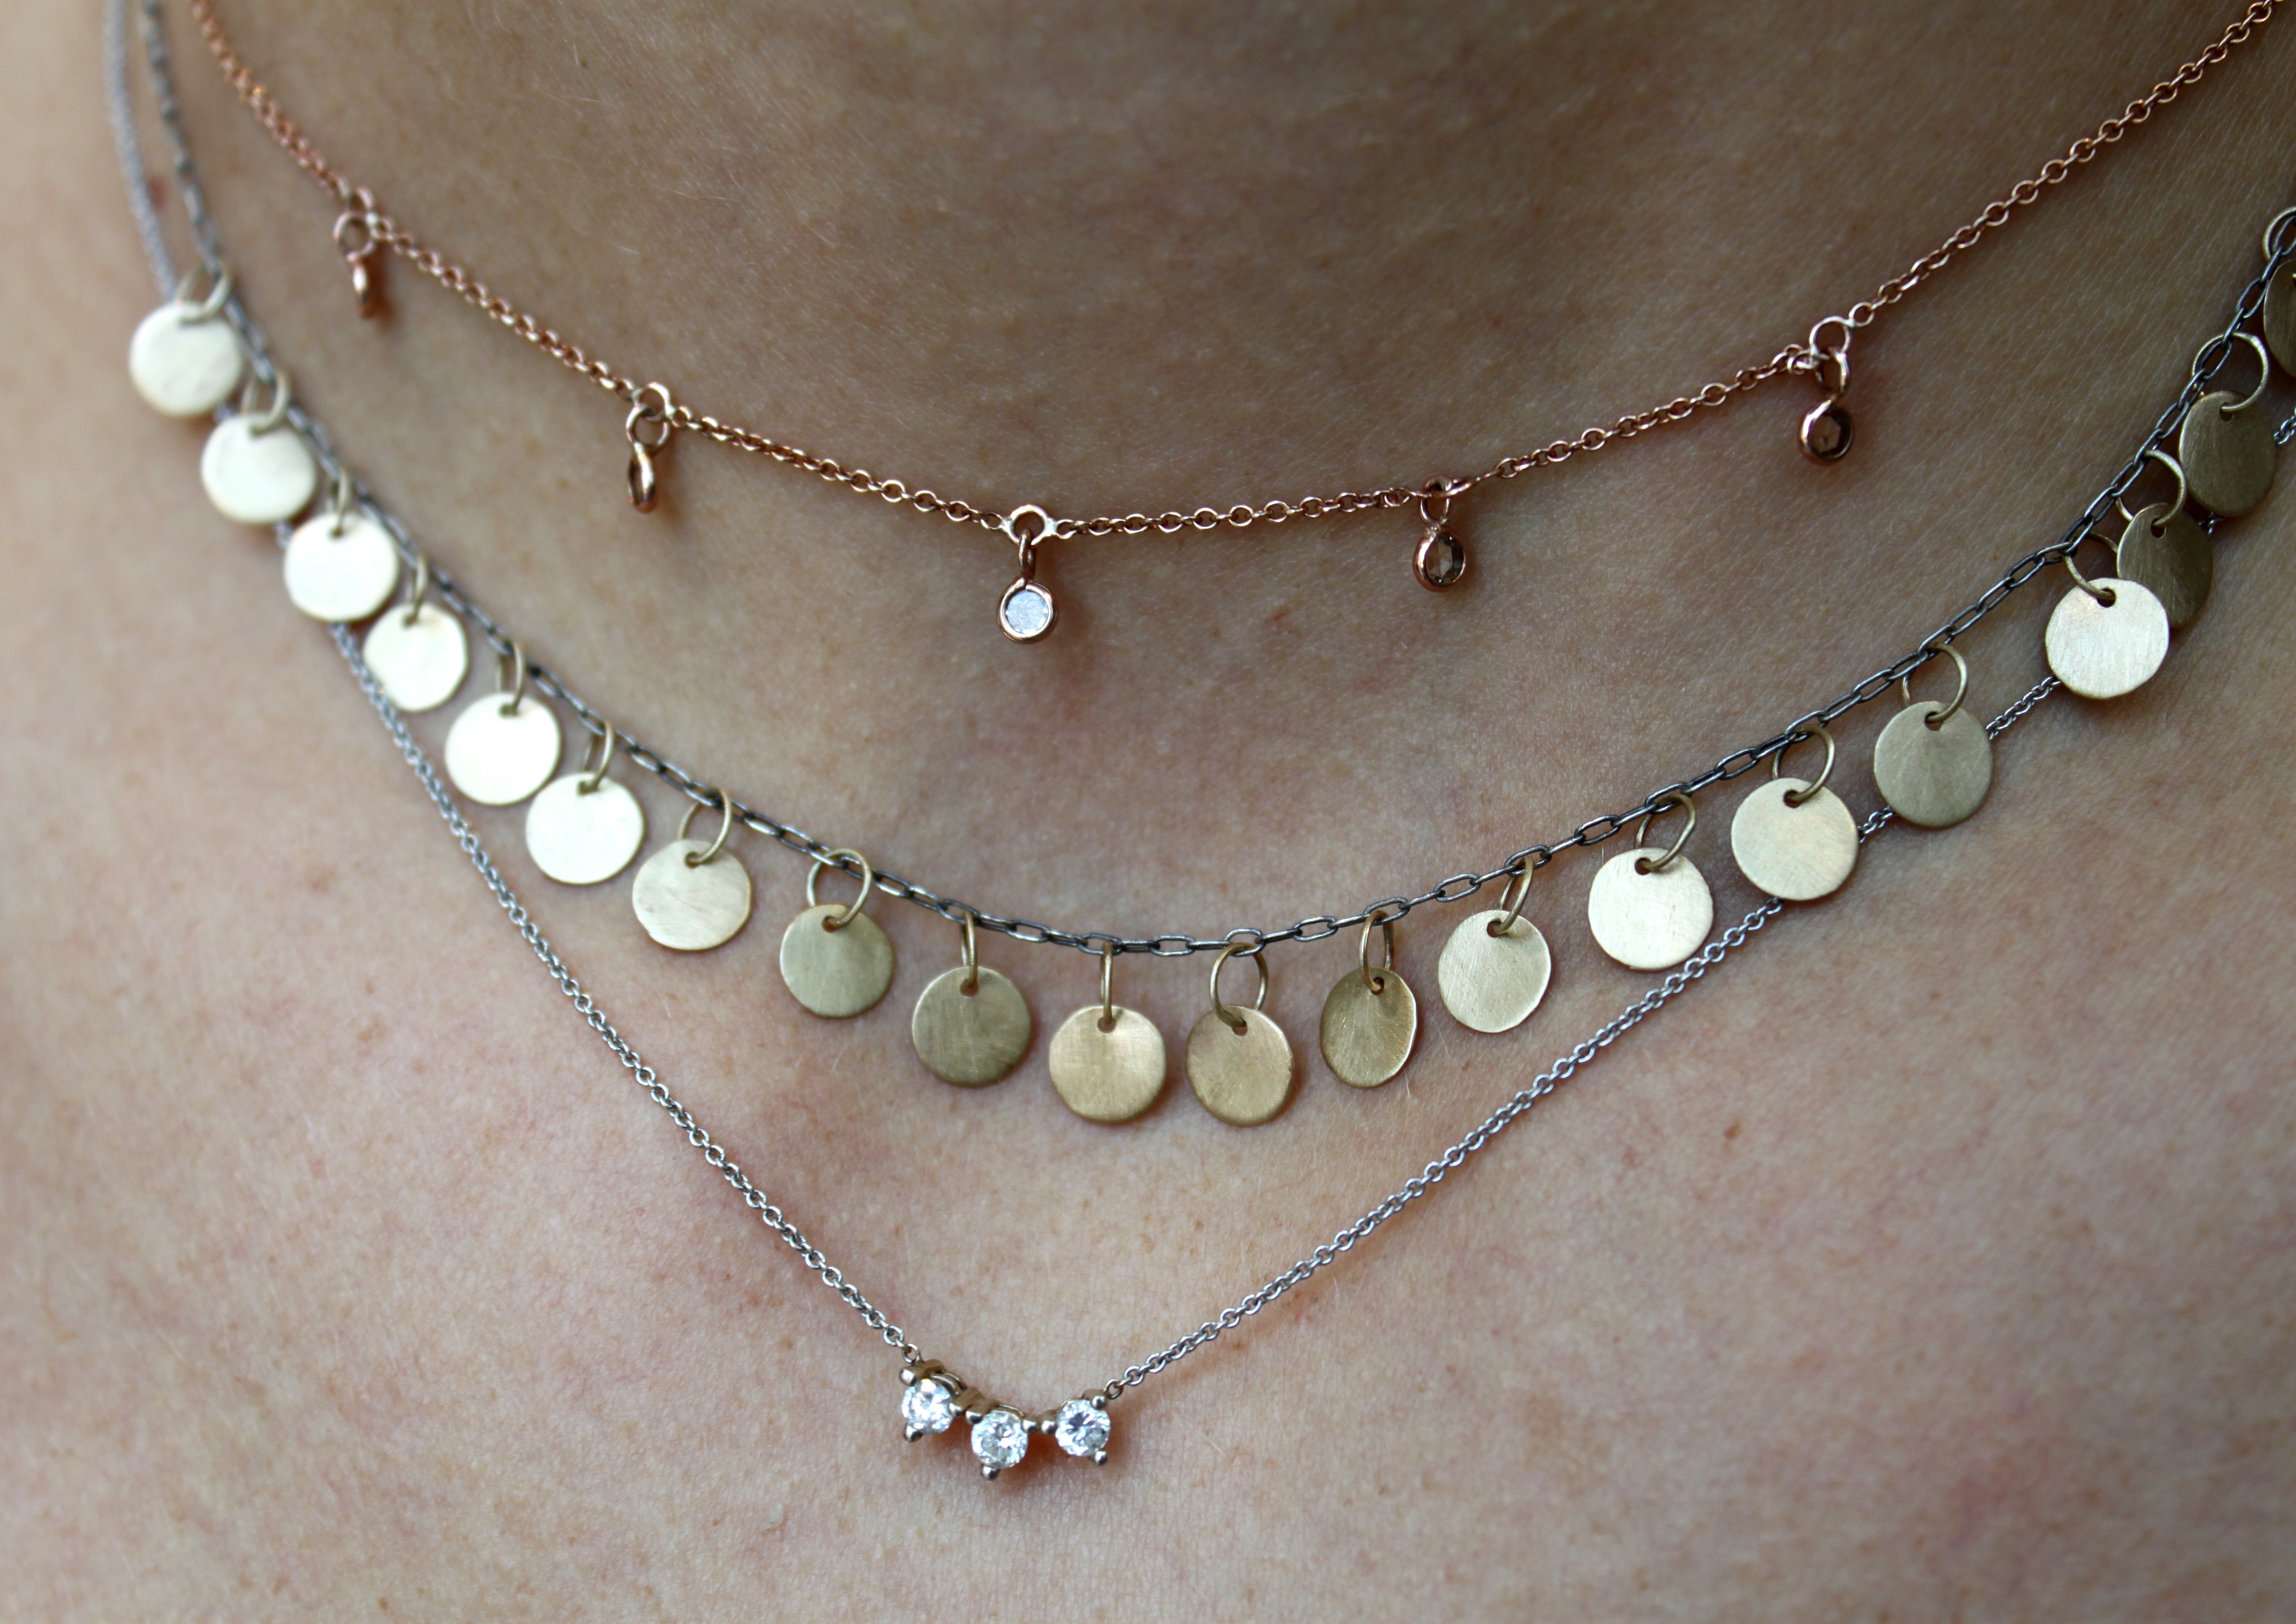 Gold Disc Necklace - Rebecca Lankford Designs - Houston, TX